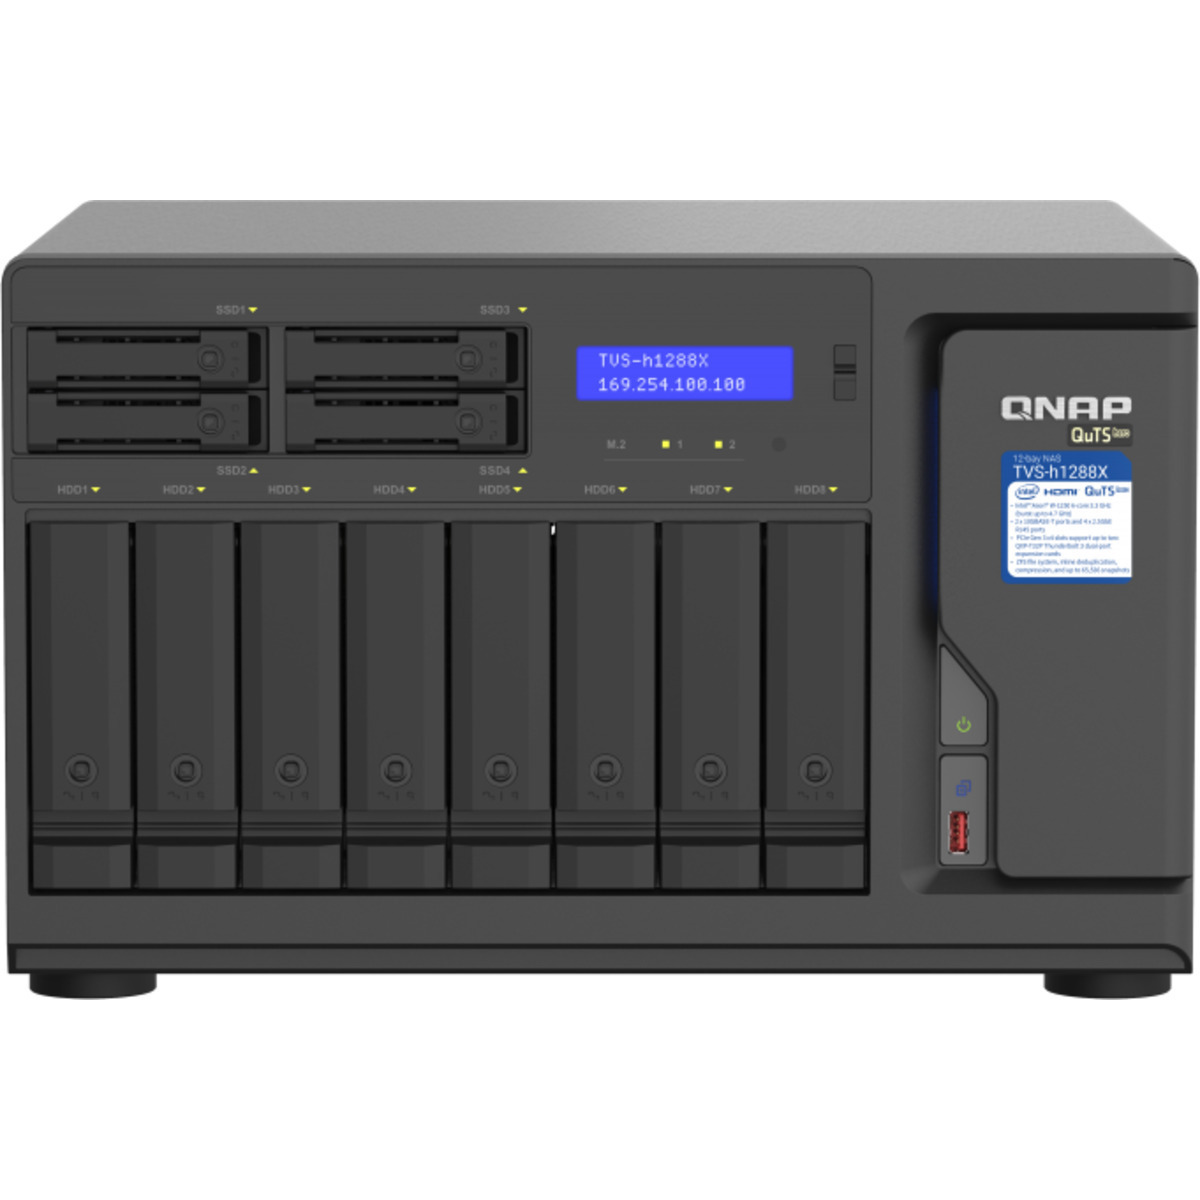 QNAP TVS-h1288X QuTS hero NAS 192tb 8+4-Bay Desktop Multimedia / Power User / Business NAS - Network Attached Storage Device 8x24tb Seagate IronWolf Pro ST24000NT002 3.5 7200rpm SATA 6Gb/s HDD NAS Class Drives Installed - Burn-In Tested TVS-h1288X QuTS hero NAS